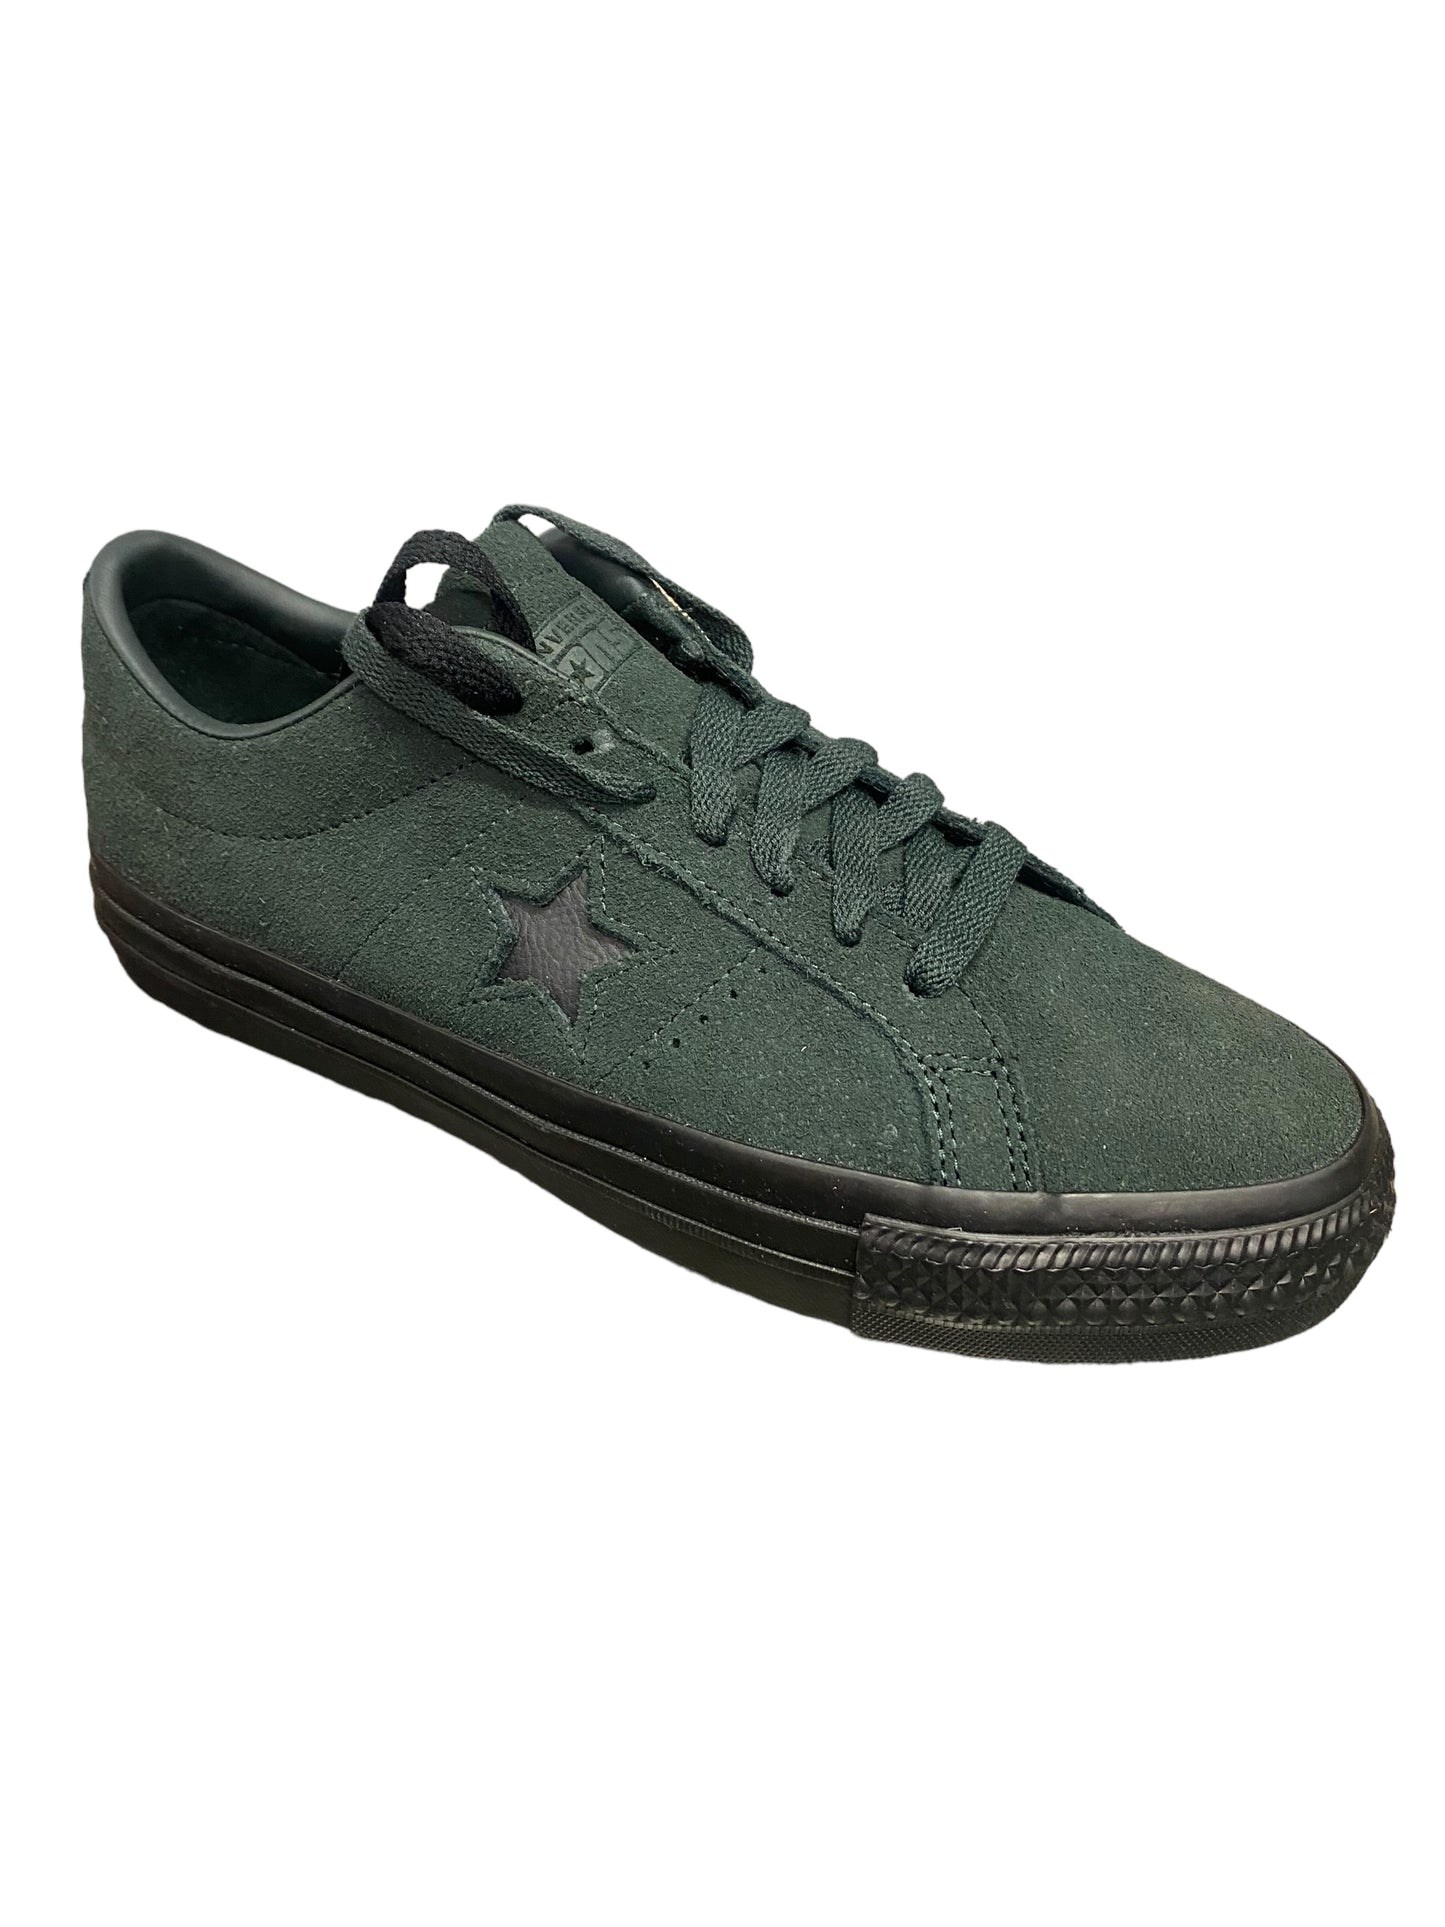 Converse Cons One Star